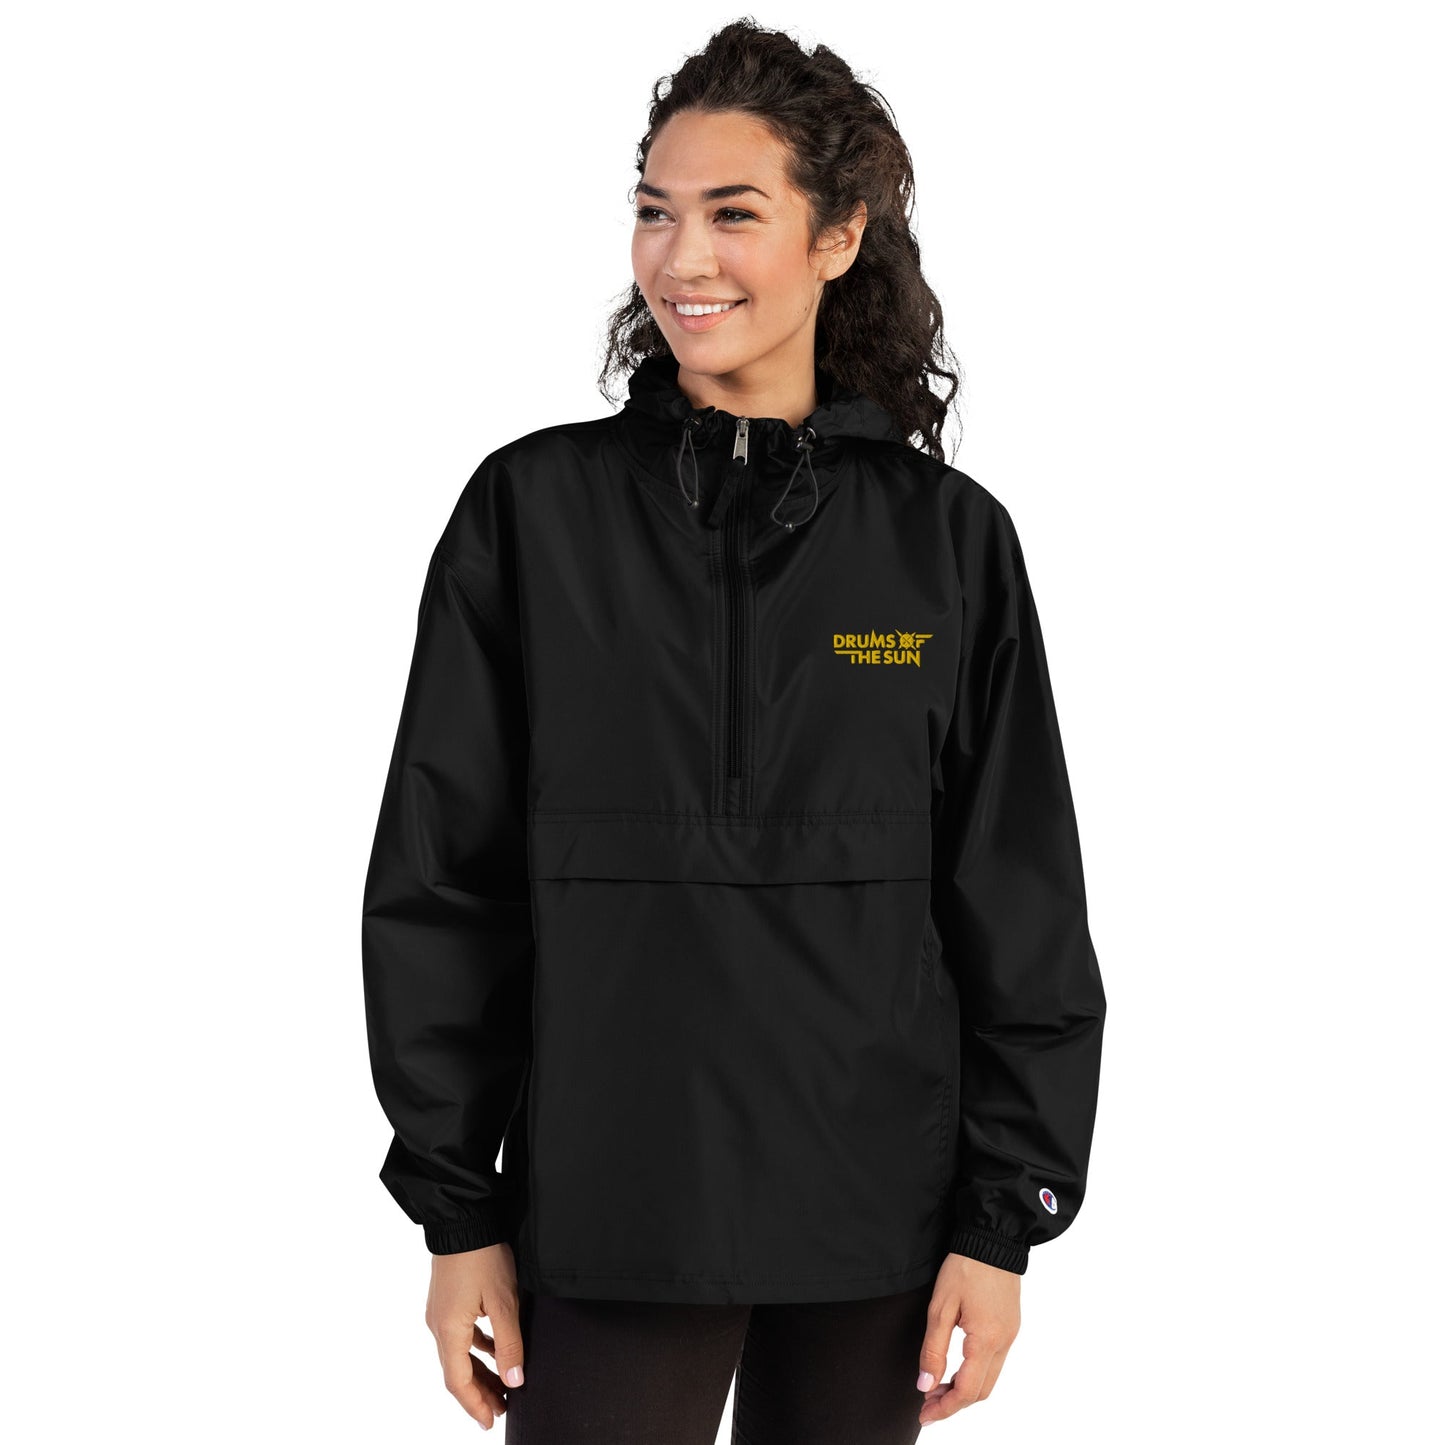 Drums of the Sun Embroidered Champion Packable Jacket - BeExtra! Apparel & More